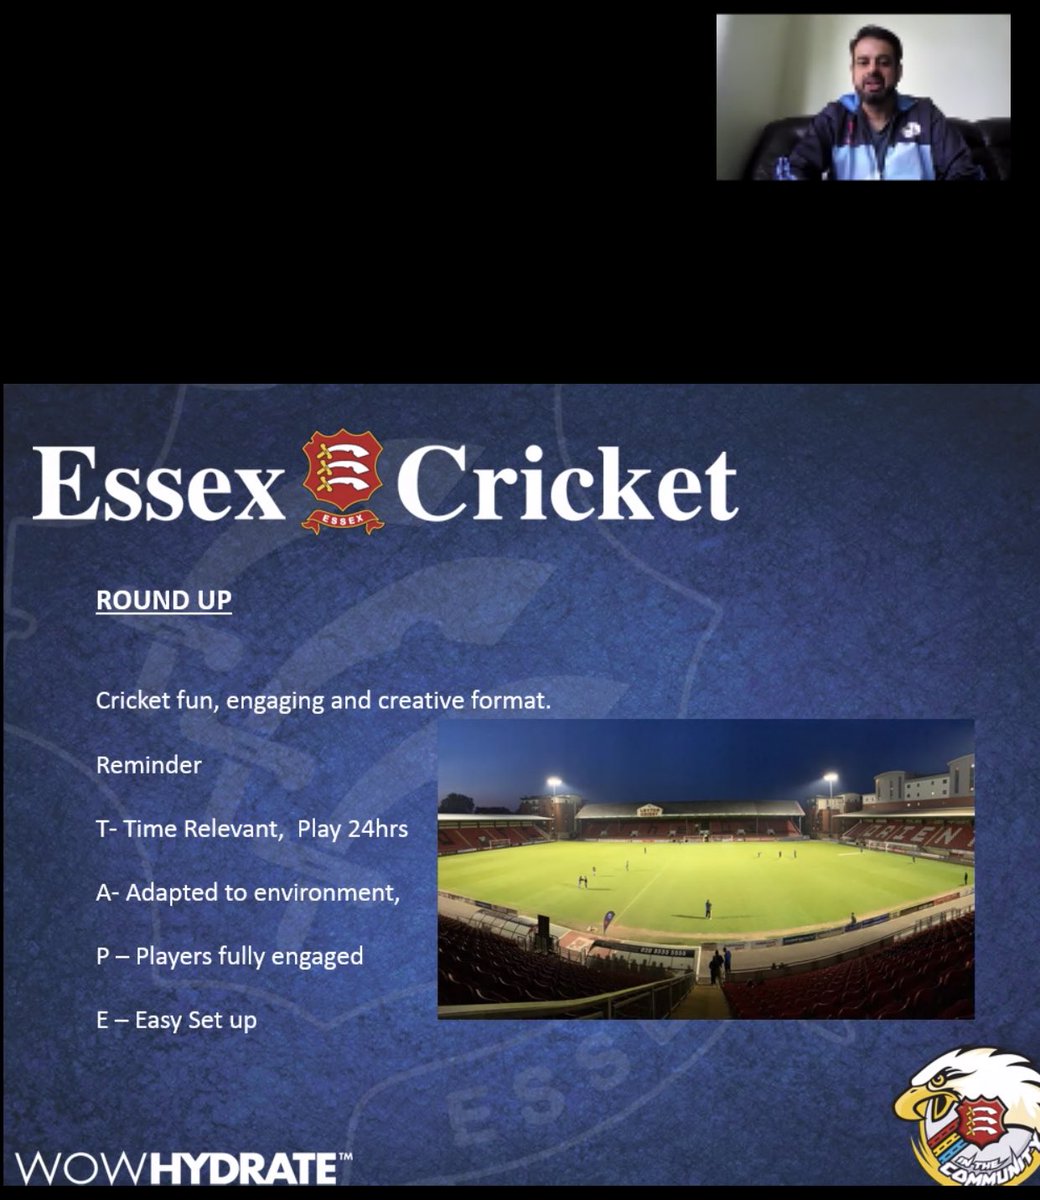 Today’s webinar sessions was all about tapeball and different ways we can get involved! Thanks @EssexCCB and @SajidPatelNCL #TapeballCricket #webinar